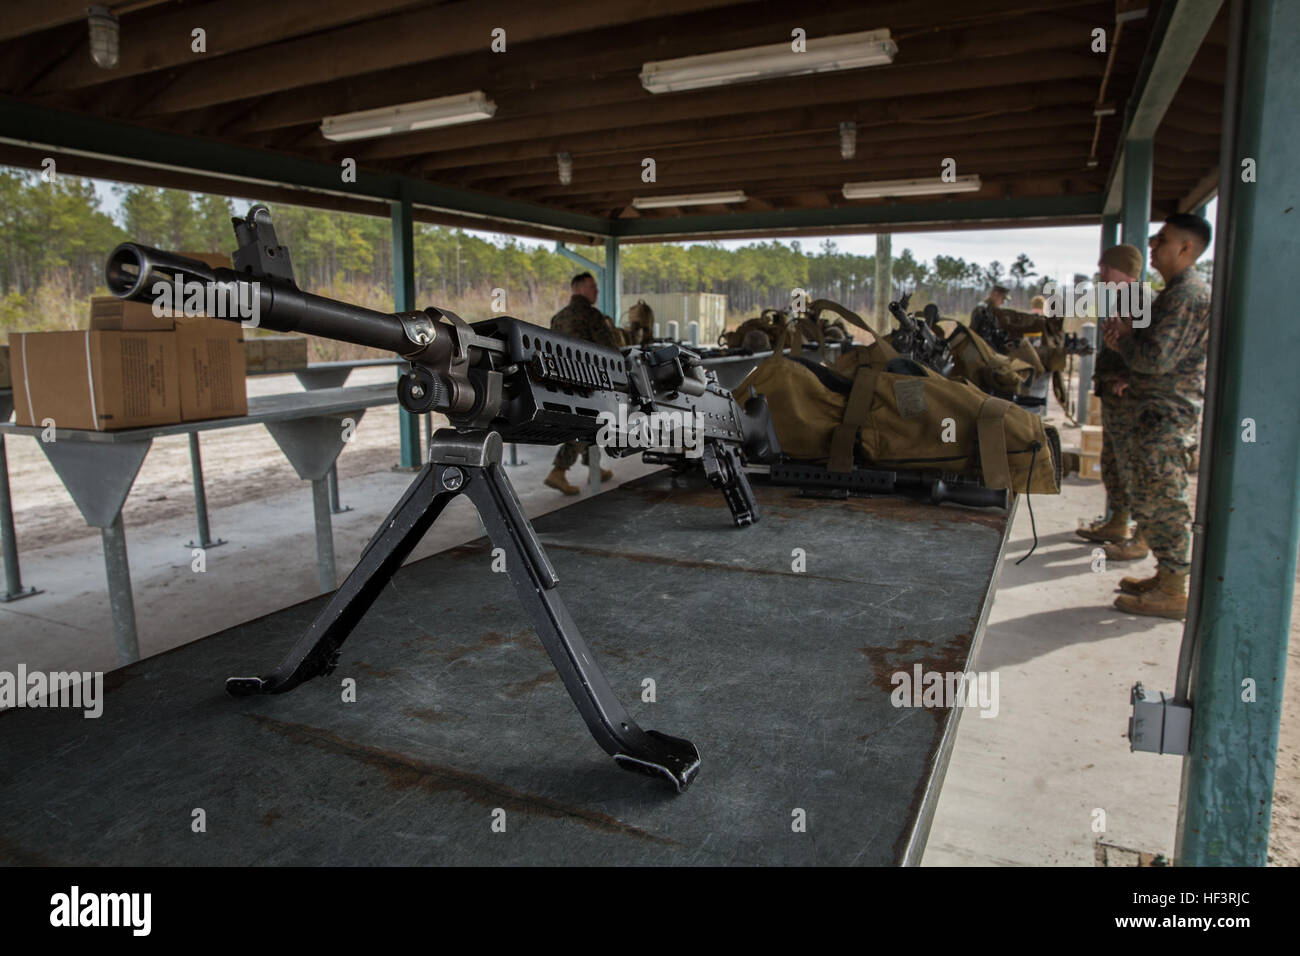 A U.S. Marine Corps M-240B machine gun is staged on a loading table during weapons training conducted by 2d Low Altitude Air Defense Battalion (2D LAAD), Marine Medium Tiltrotor Squadron 264 (reinforced), near Marine Corps Base Stone Bay, N.C., Feb. 15, 2016. 2D LAAD conducted the training in preparation for deployment with the 22nd Marine Expeditionary Unit. (U.S. Marine Corps photo by Cpl. Jodson B. Graves/Released) 2D LAAD Trains to Reinforce VMM-264 160215-M-SW506-260 Stock Photo